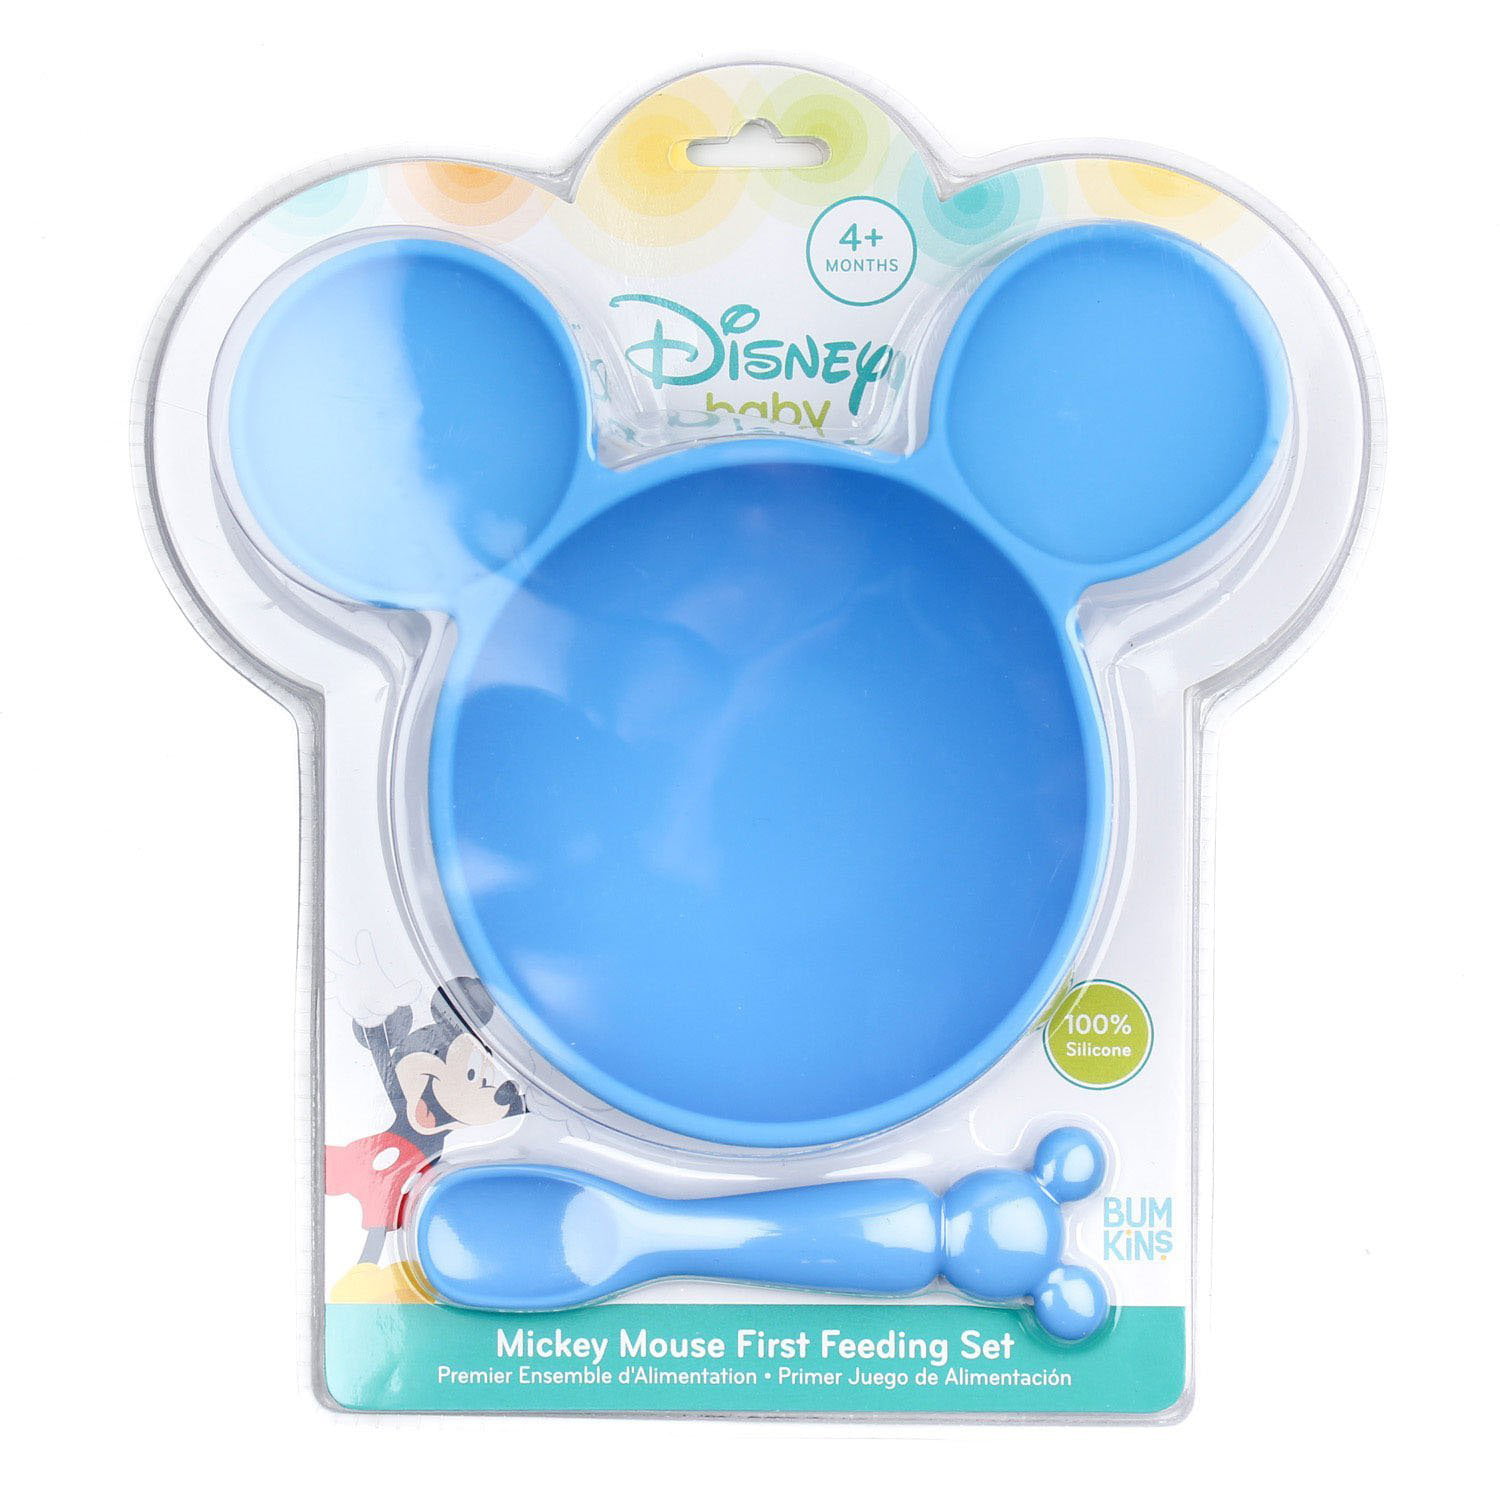 BABY SUCTION BOWL WITH LID AND SPOON COOL LIKE MICKEY - Storline